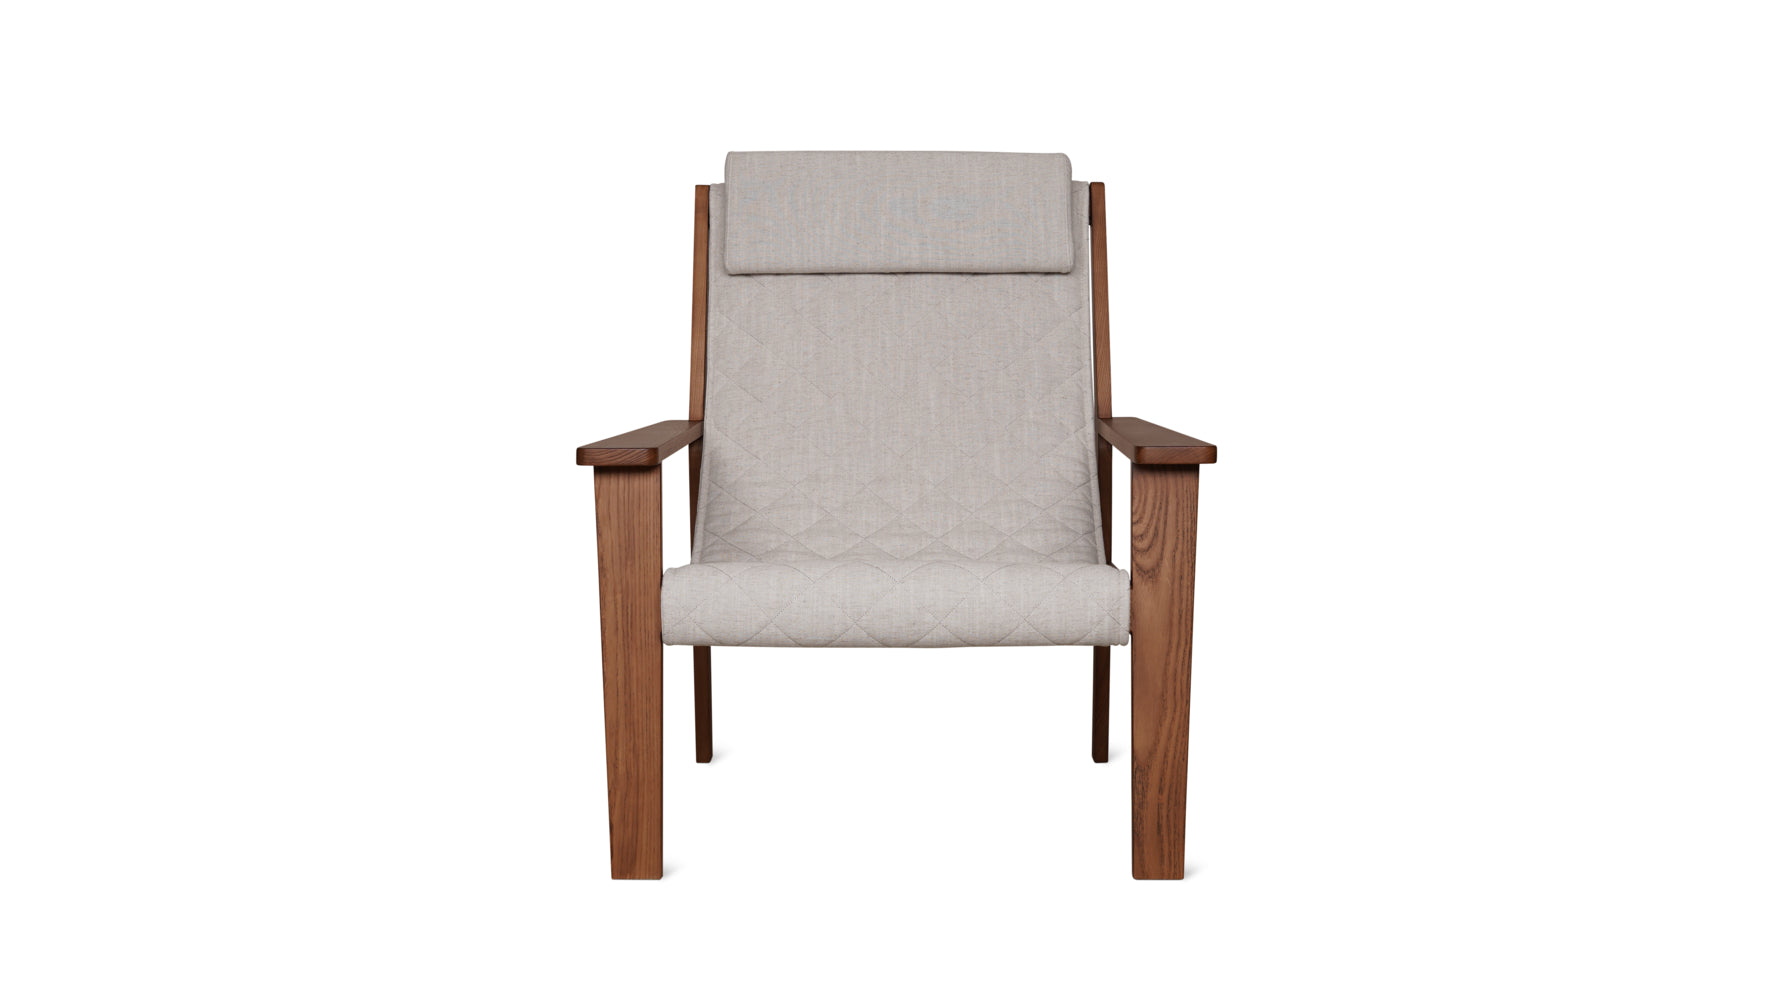 Sweet Life Sling Lounge Chair With Headrest, Natural Walnut - Image 1